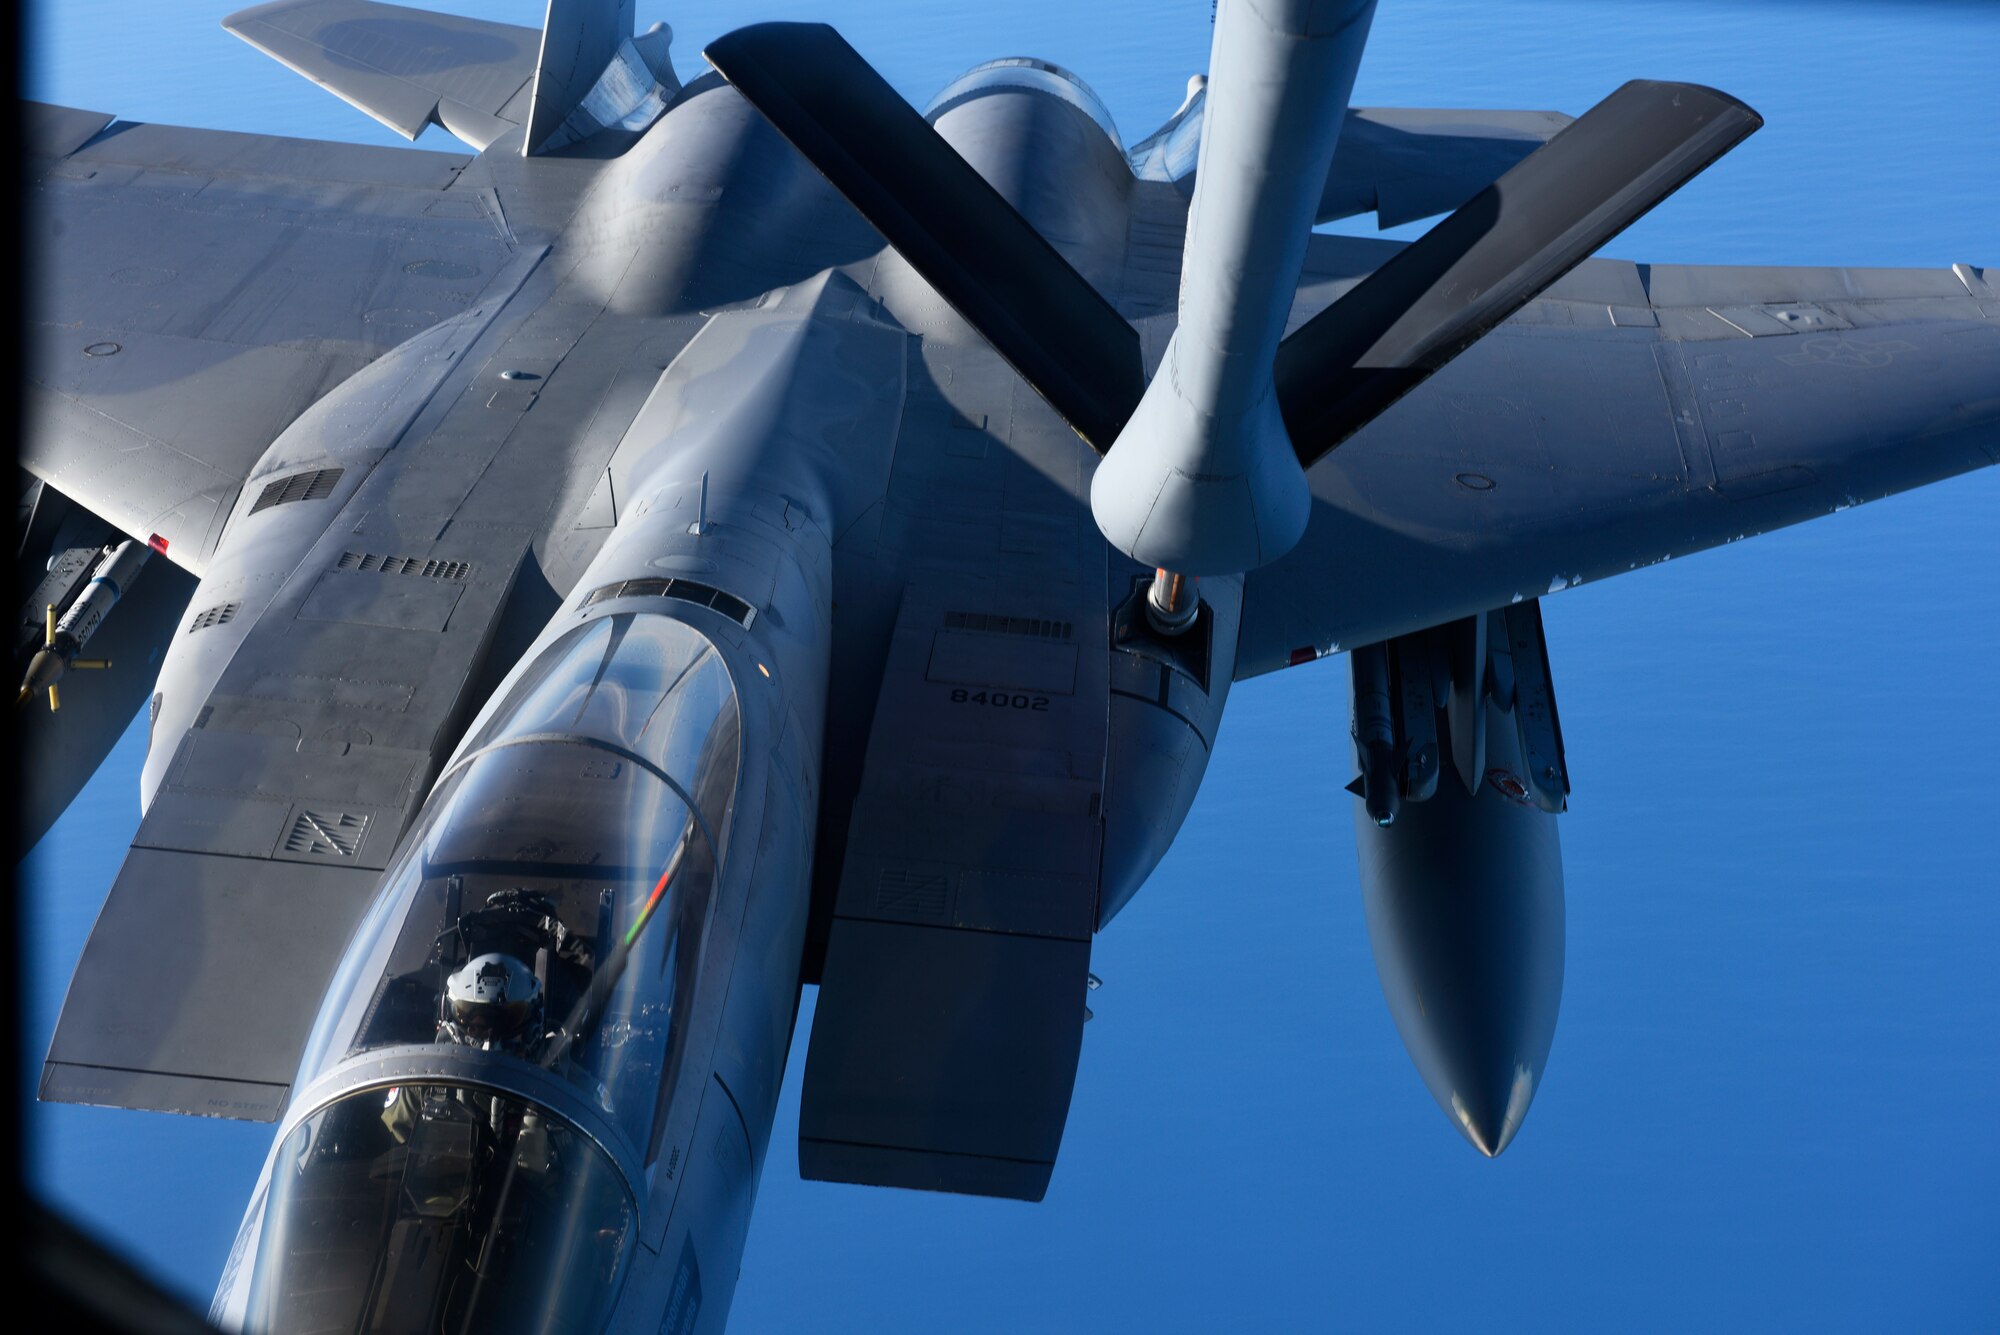 A U.S. Air National Guard F-15C Eagle from the 142nd Fighter Wing, connects with a U.S. Air Force KC-135 Stratotanker from the 92nd Air Refueling Wing during an air refueling training mission over Oregon, Nov. 22, 2019.